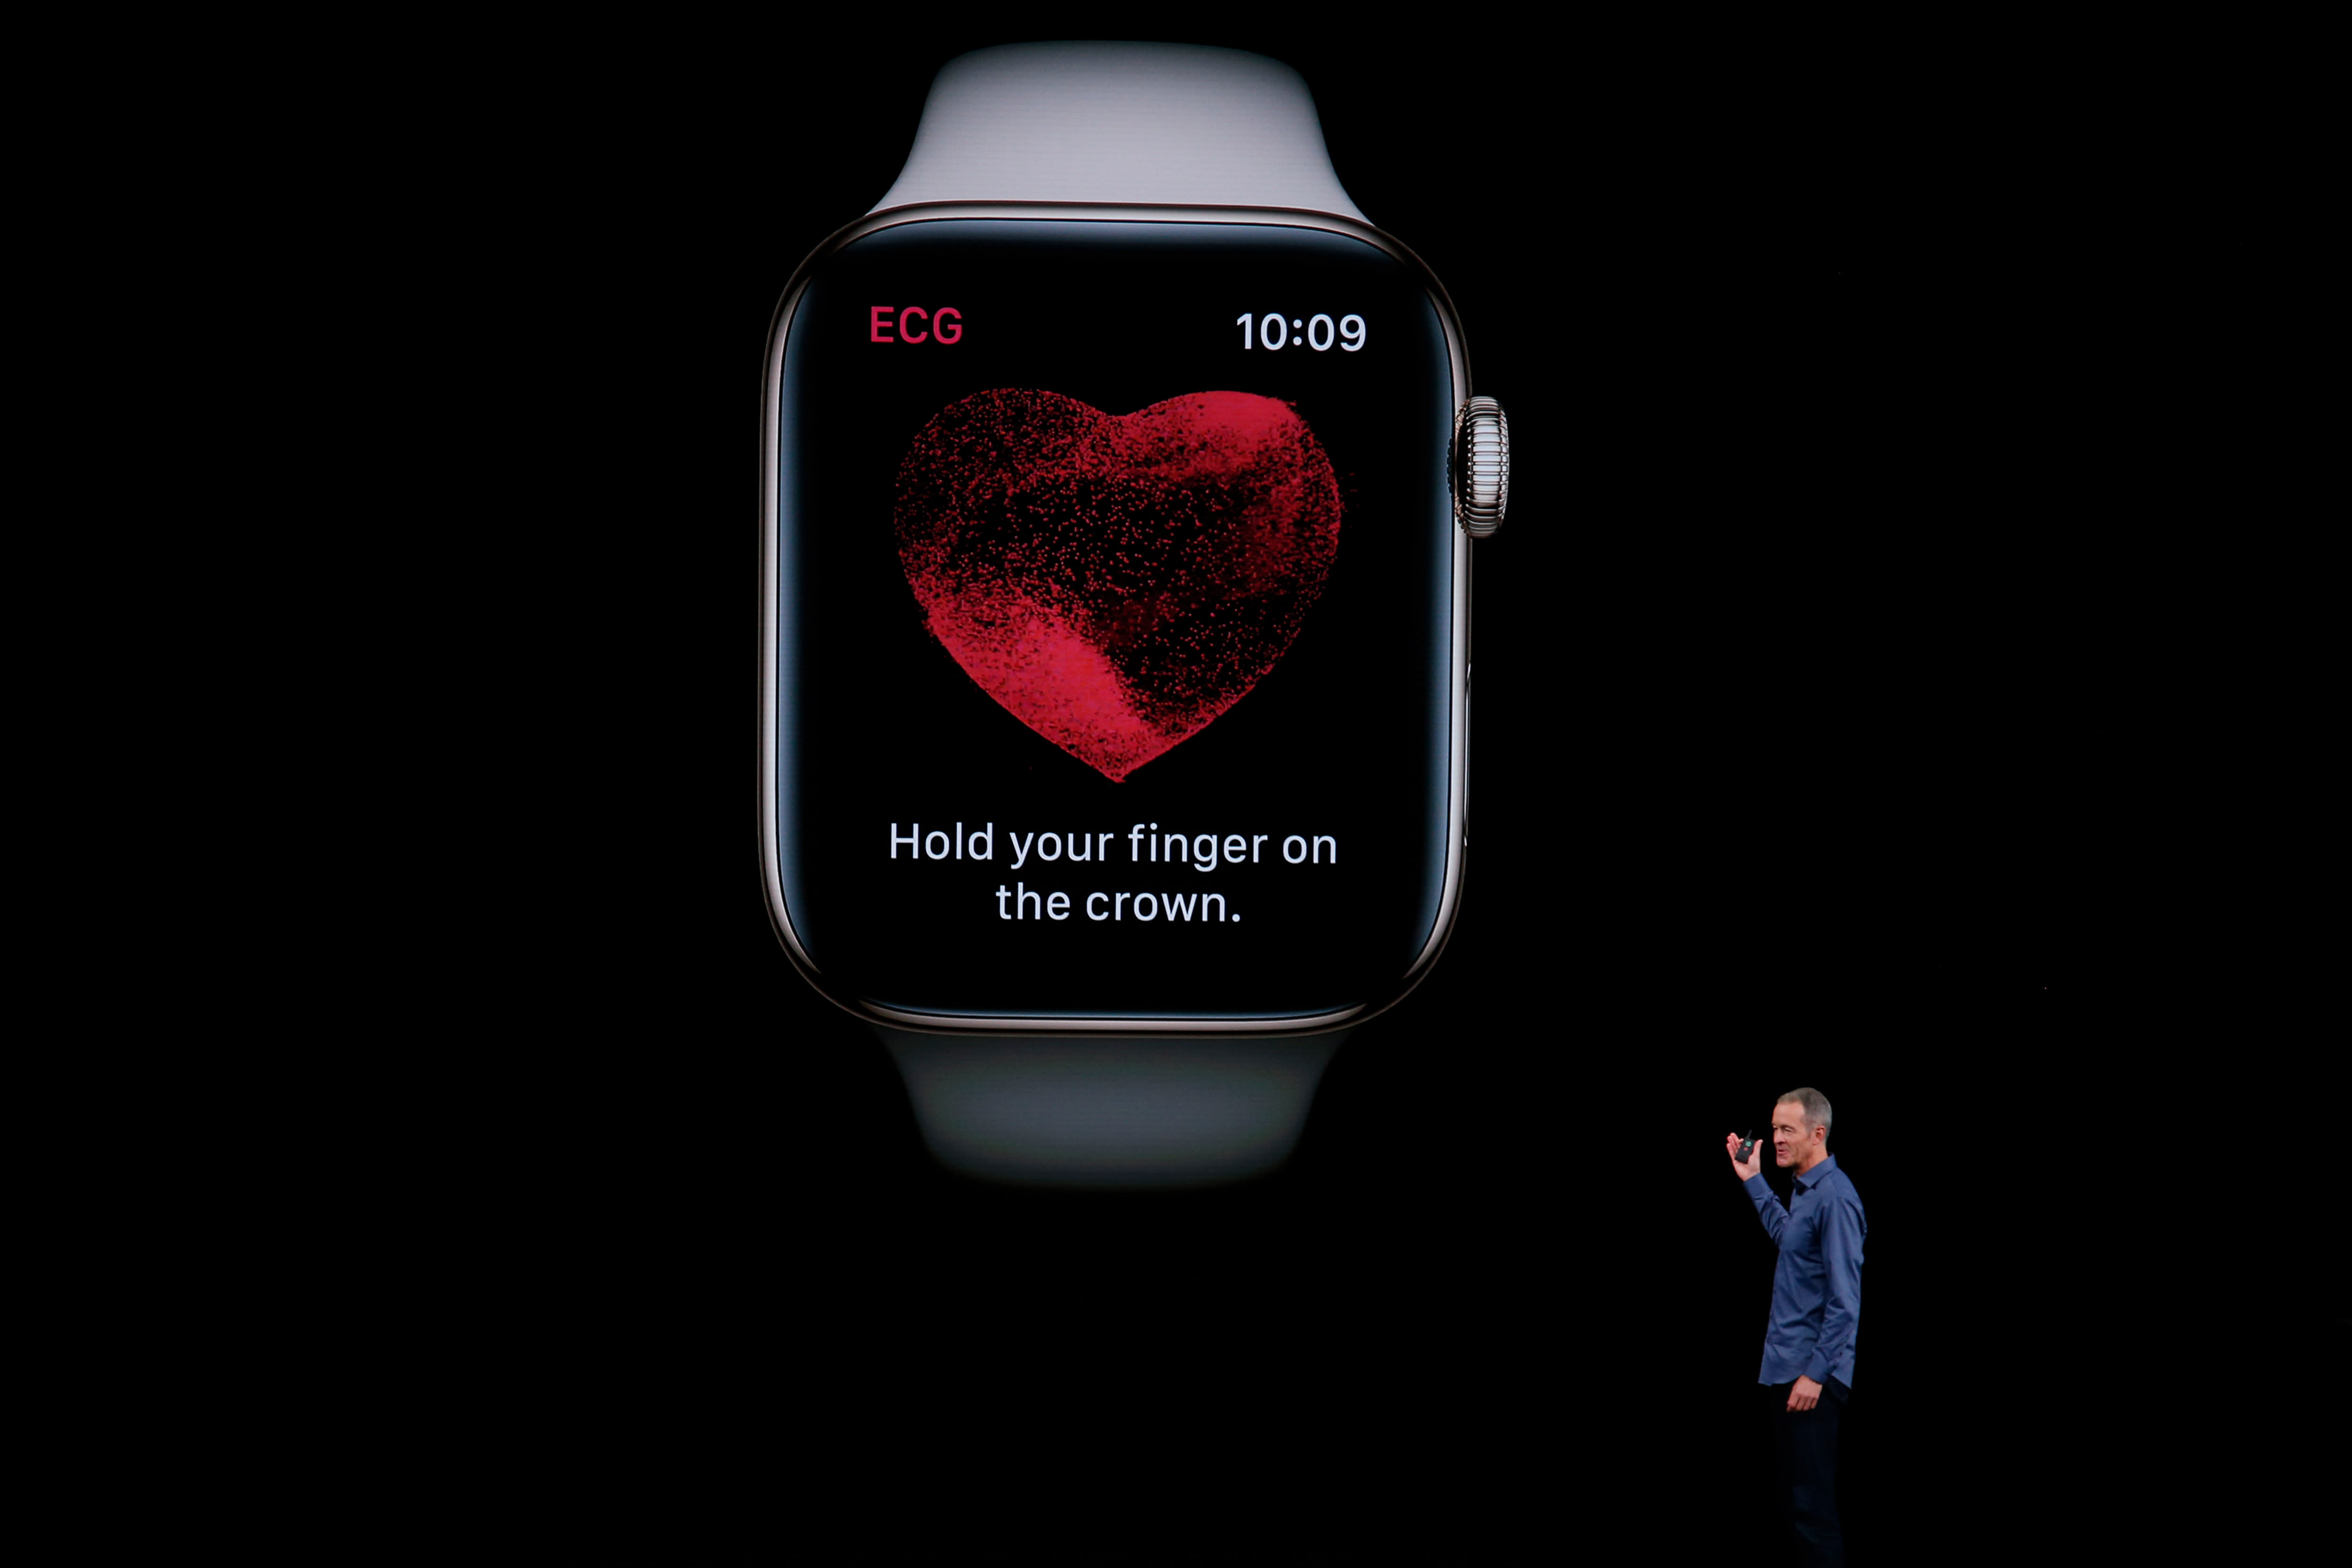 Apple Watch health and fitness features likely at Tuesday’s event